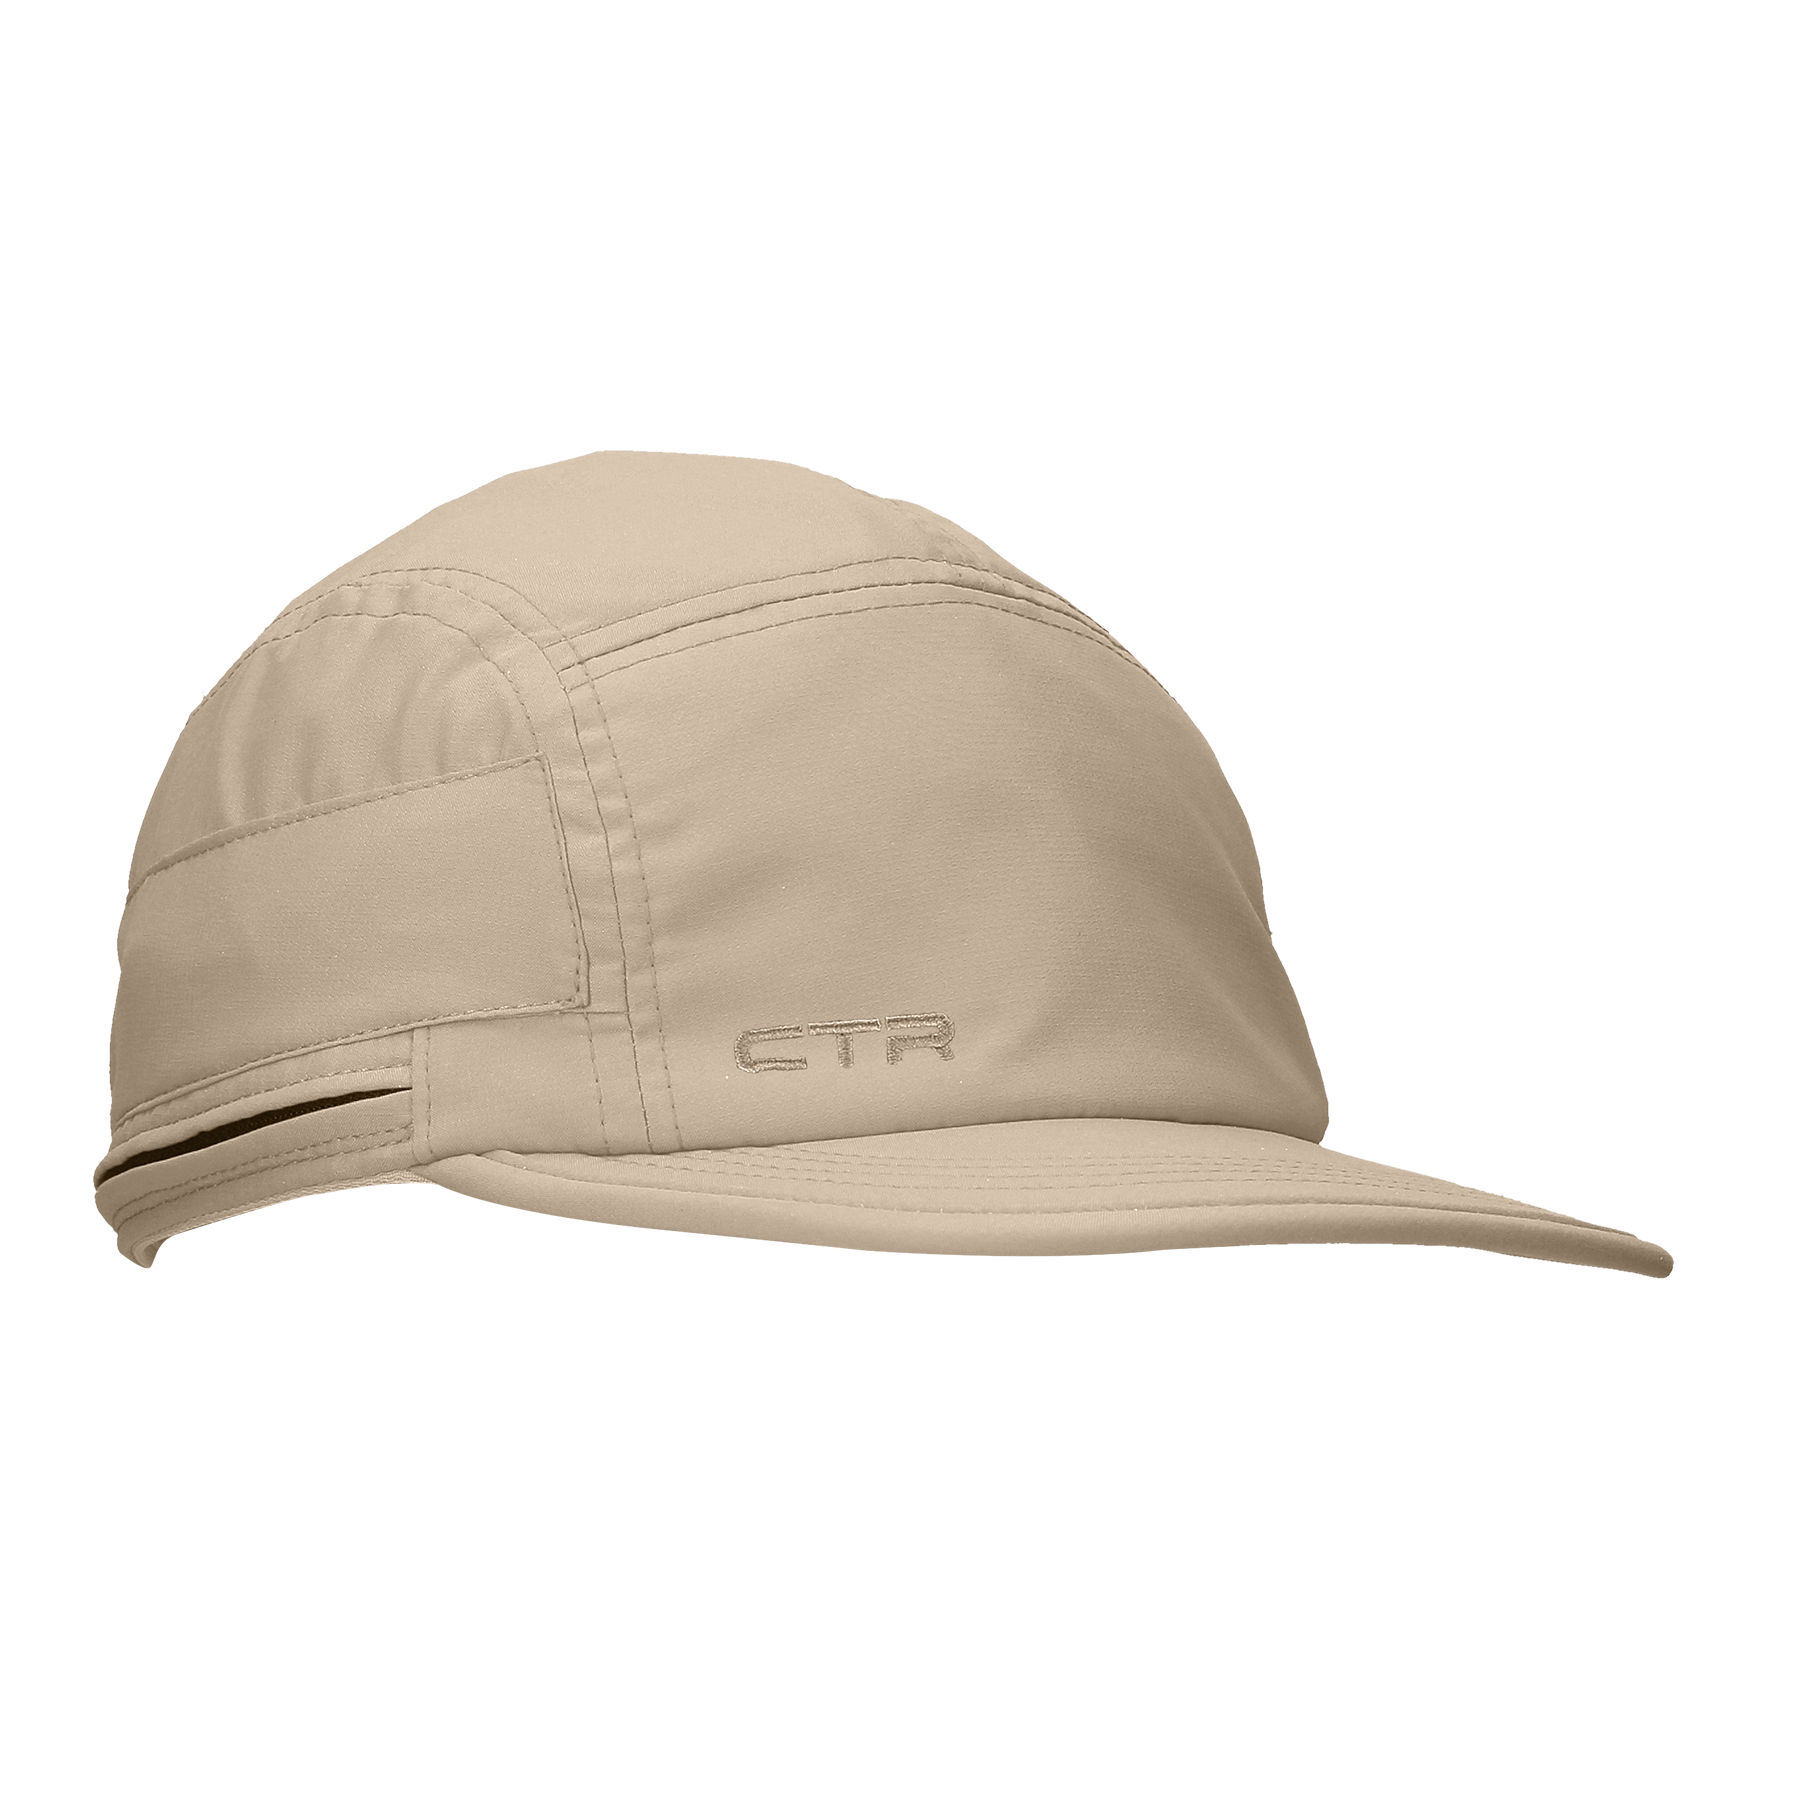 Nomad Shade Max Convertible Cap CTR Style:1365-Cap-CTR Outdoors